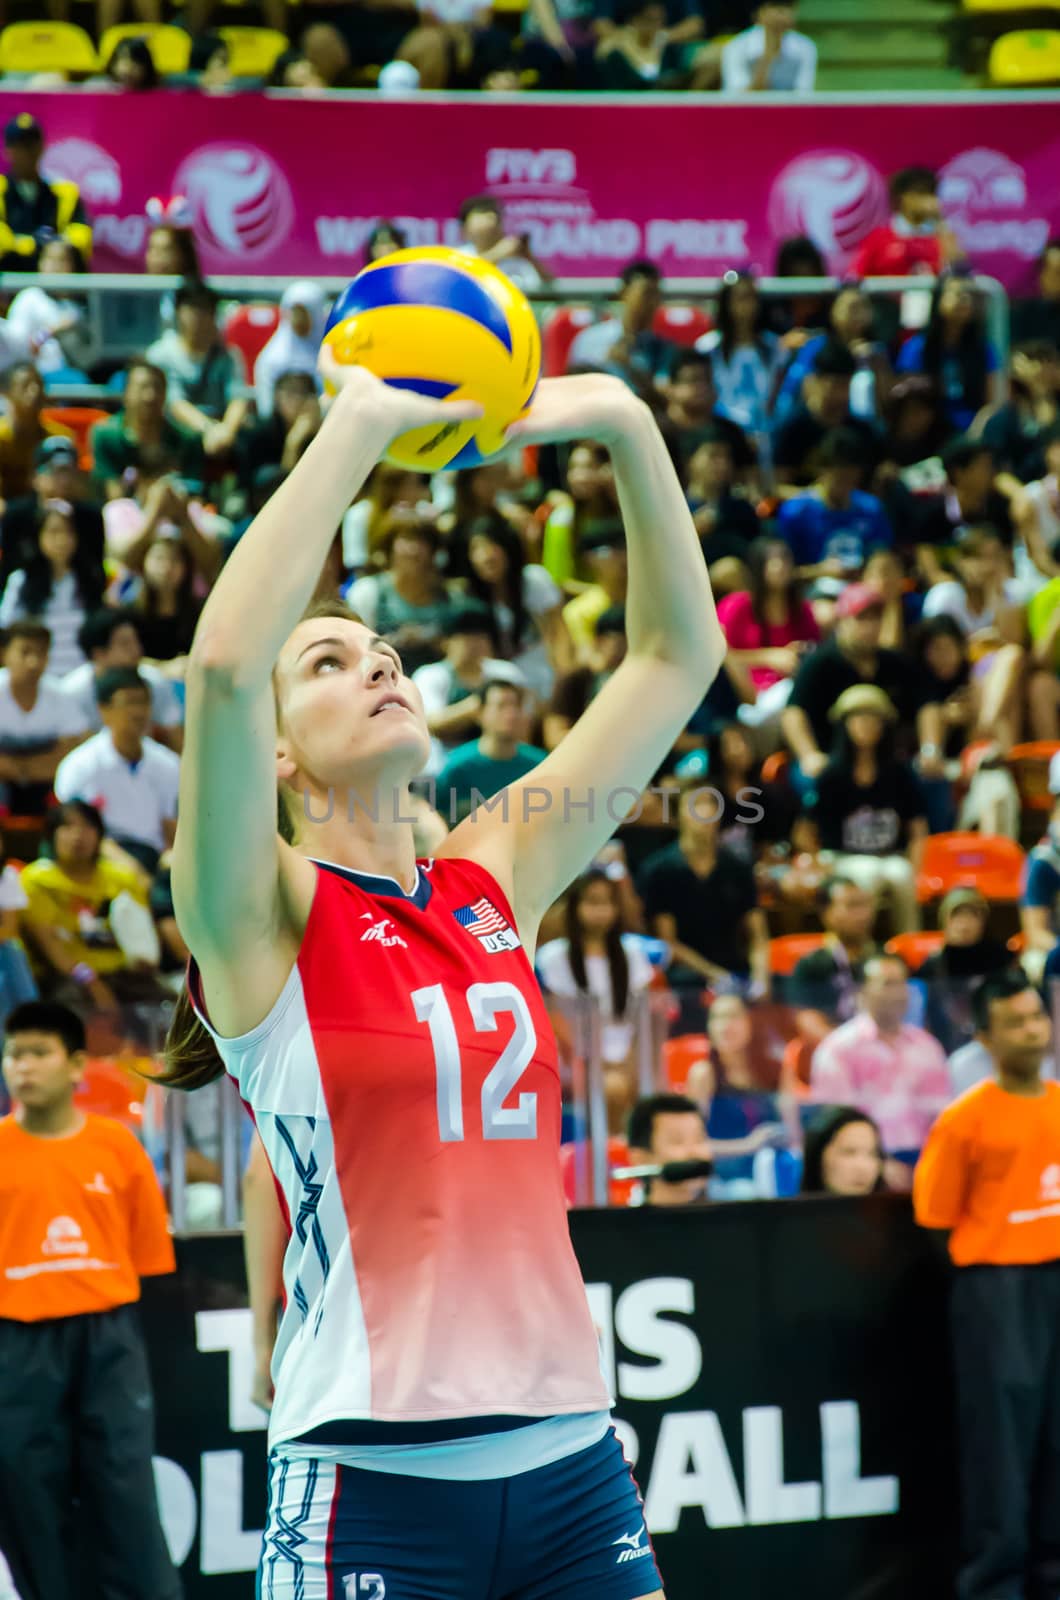 BANGKOK - AUGUST 16: Kelly Murphy of USA Volleyball Team in action during The Volleyball World Grand Prix 2014 at Indoor Stadium Huamark on August 16, 2014 in Bangkok, Thailand.